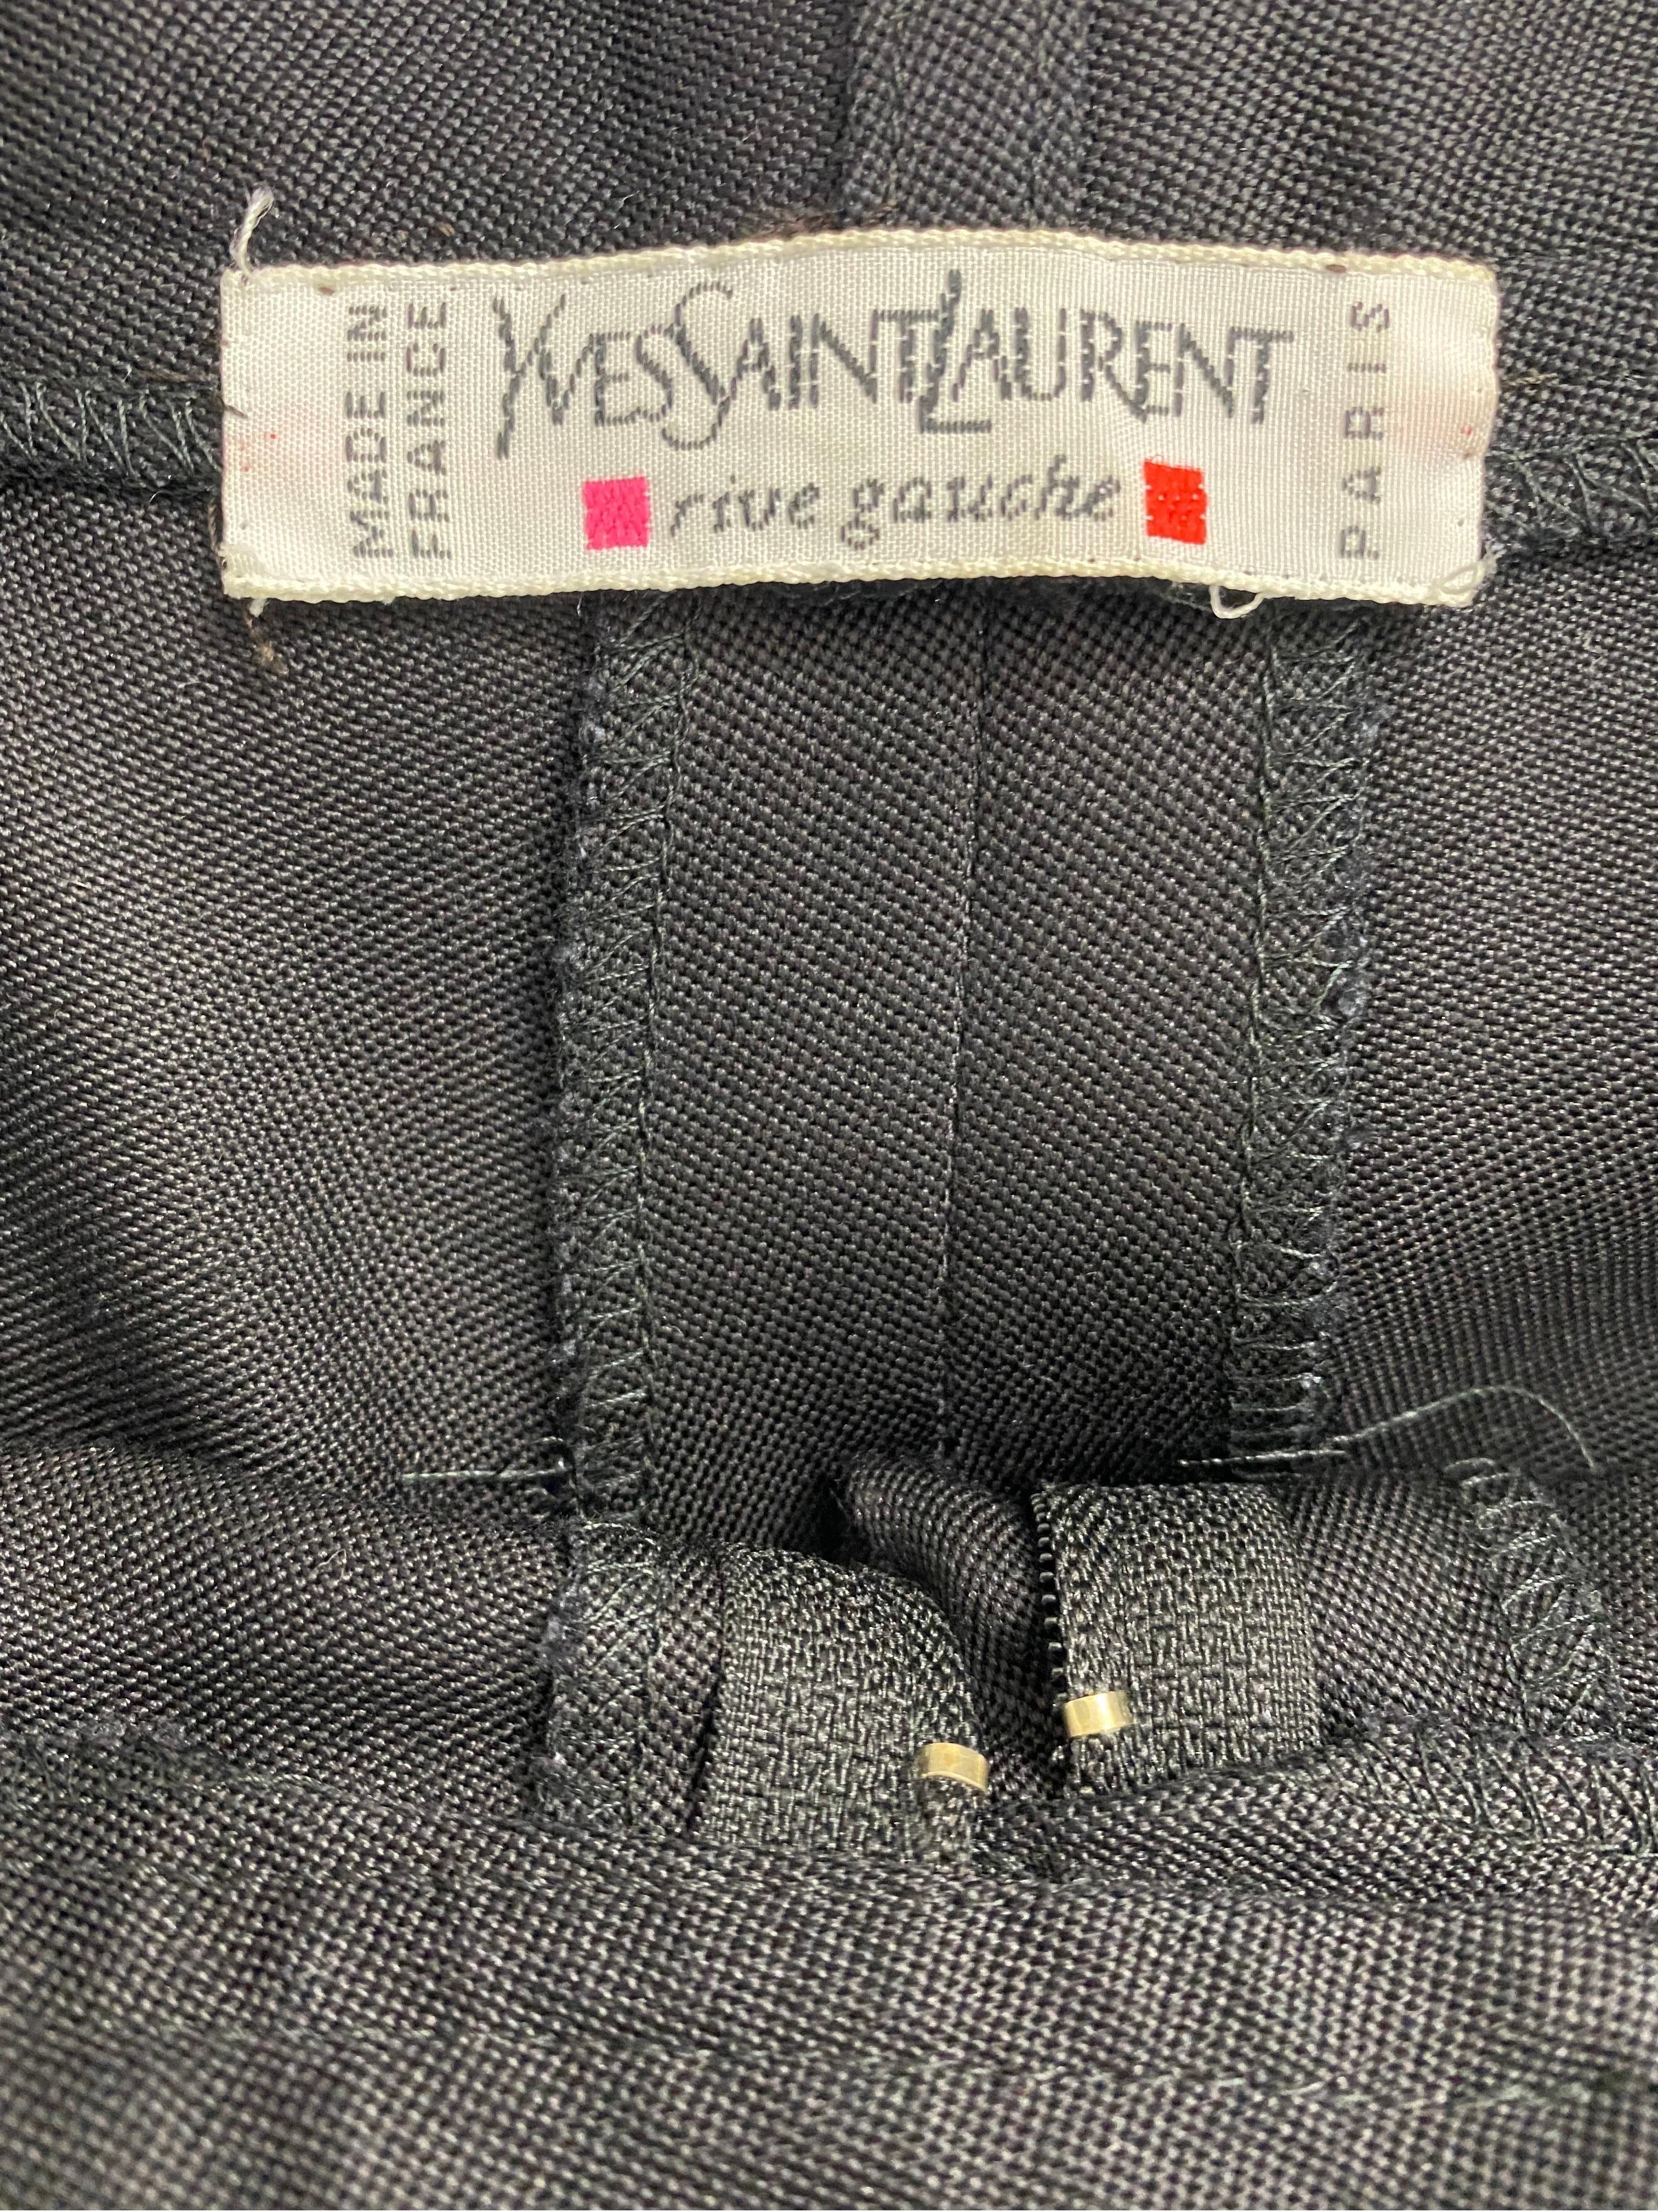 Le Smoking Yves saint Laurent Rive gauche from the 1990’s 13